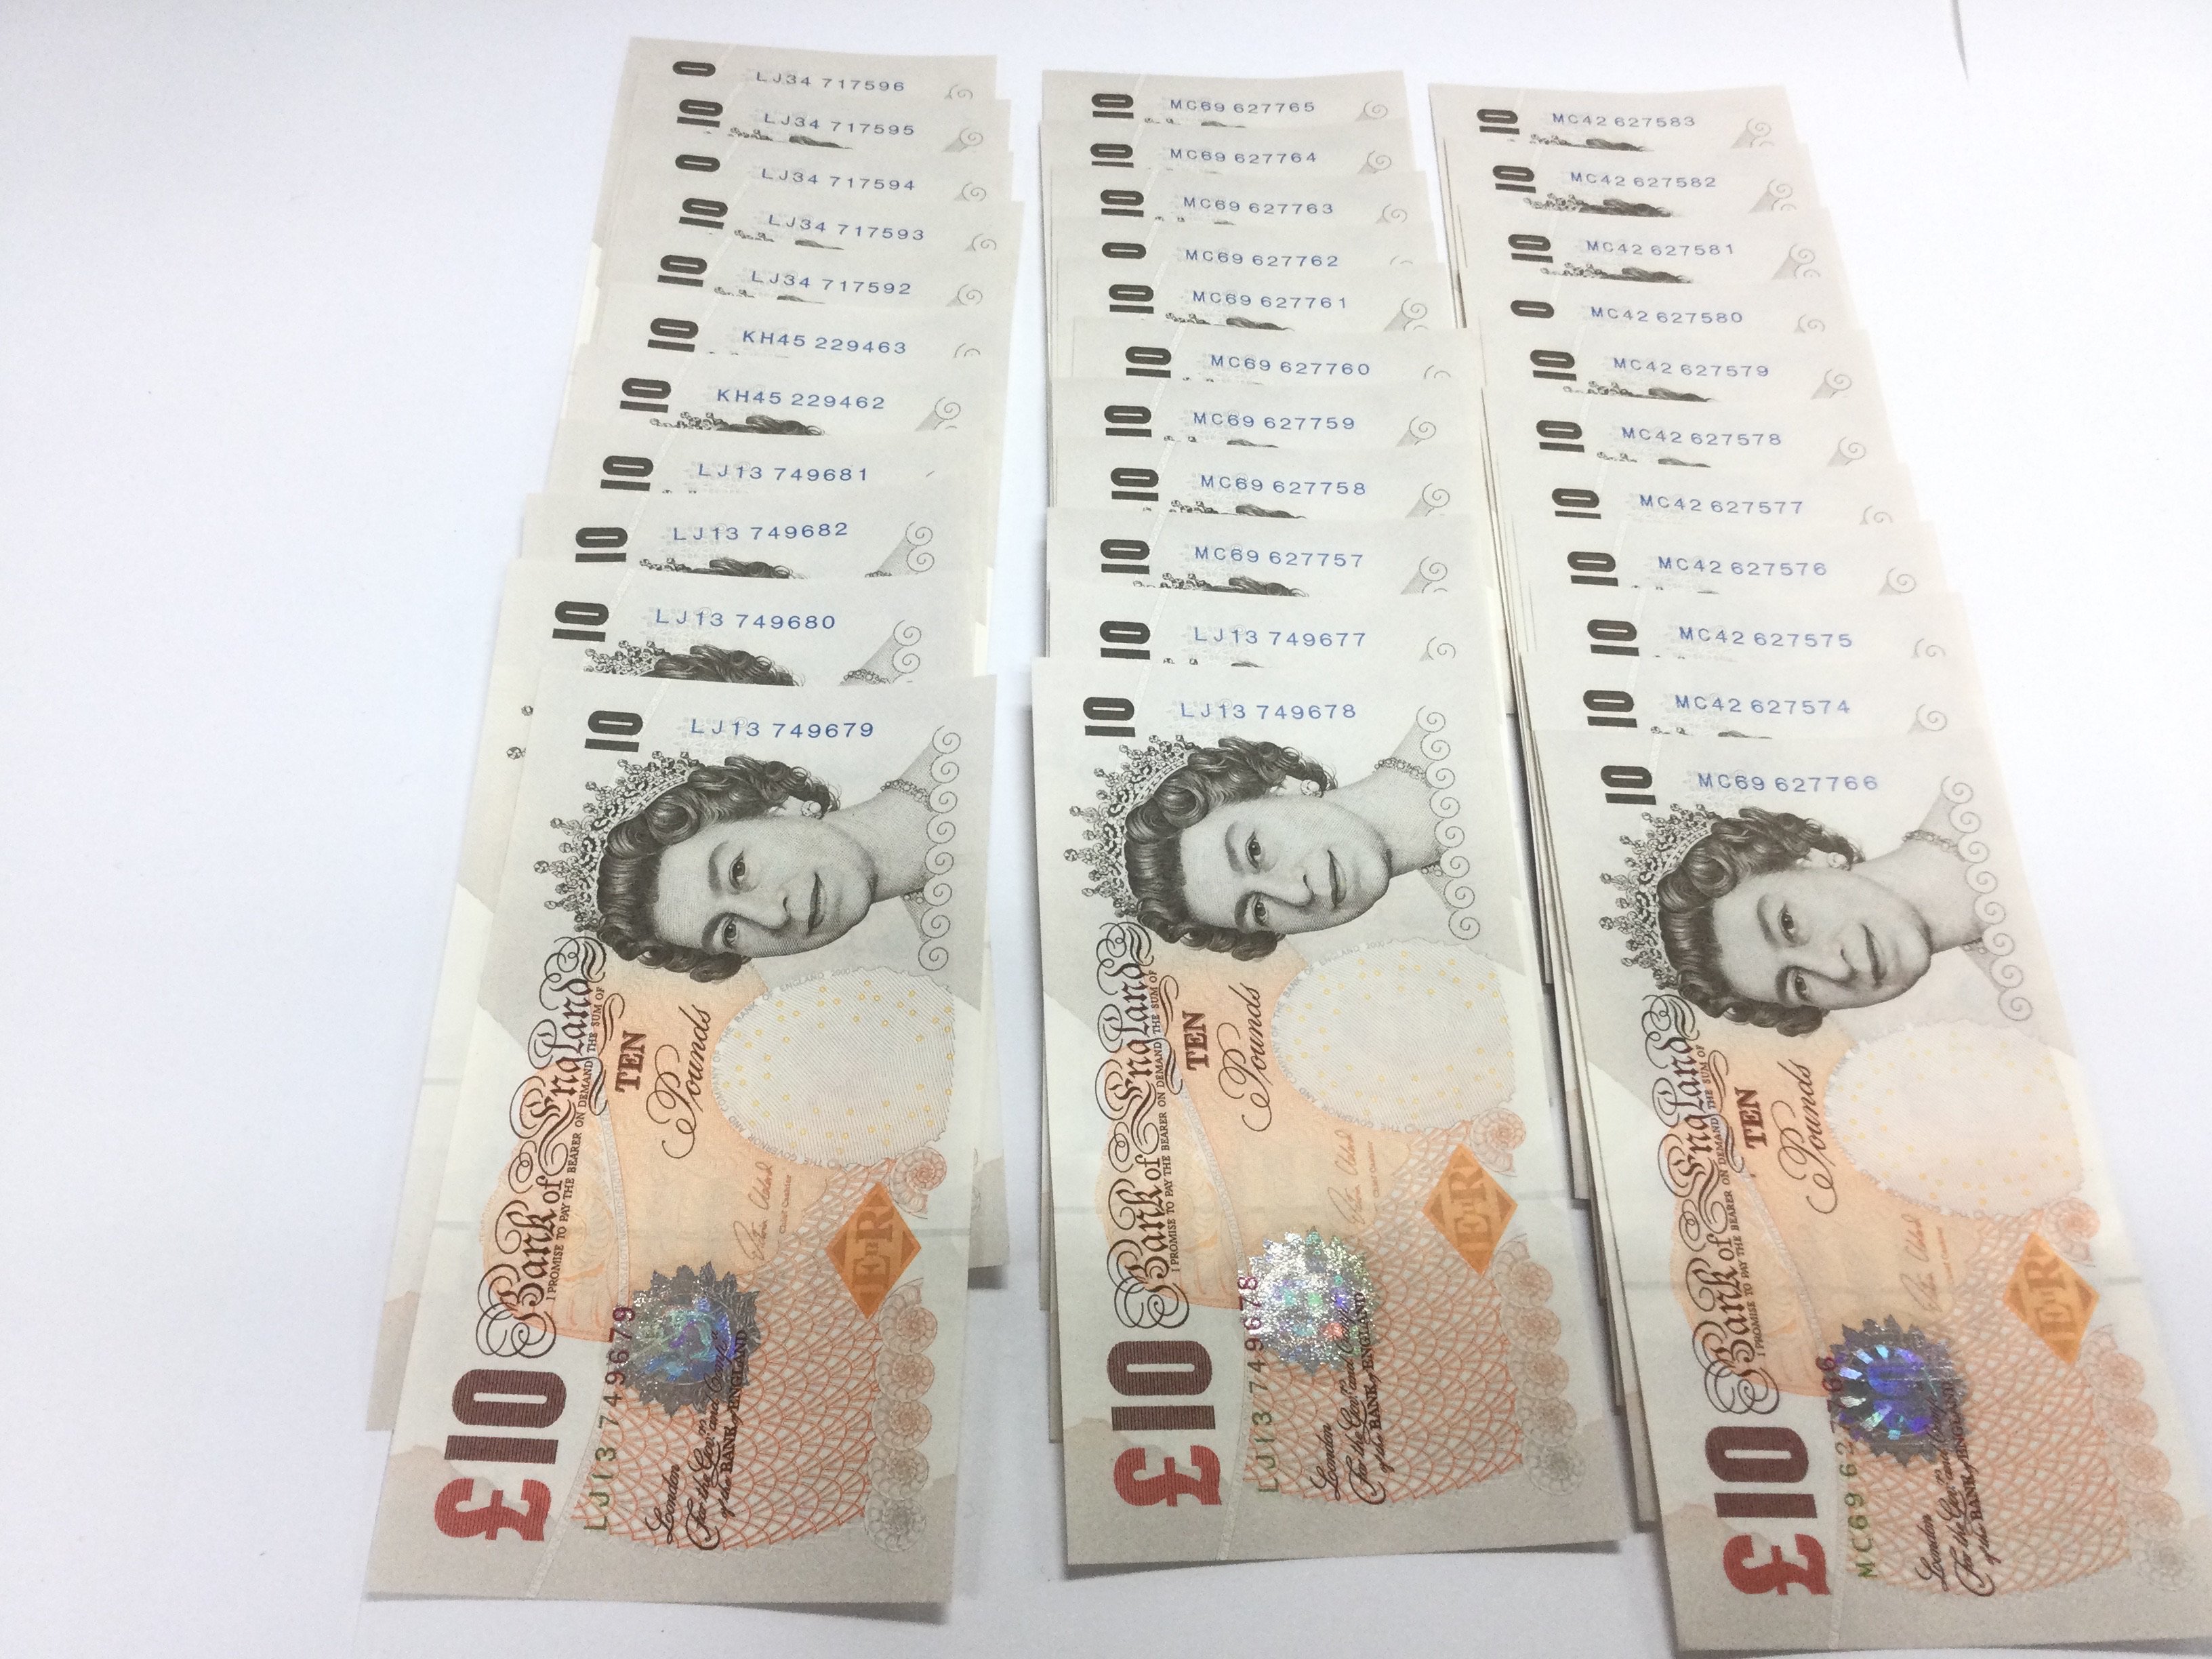 A collection of thirty three uncirculated Â£10 GB